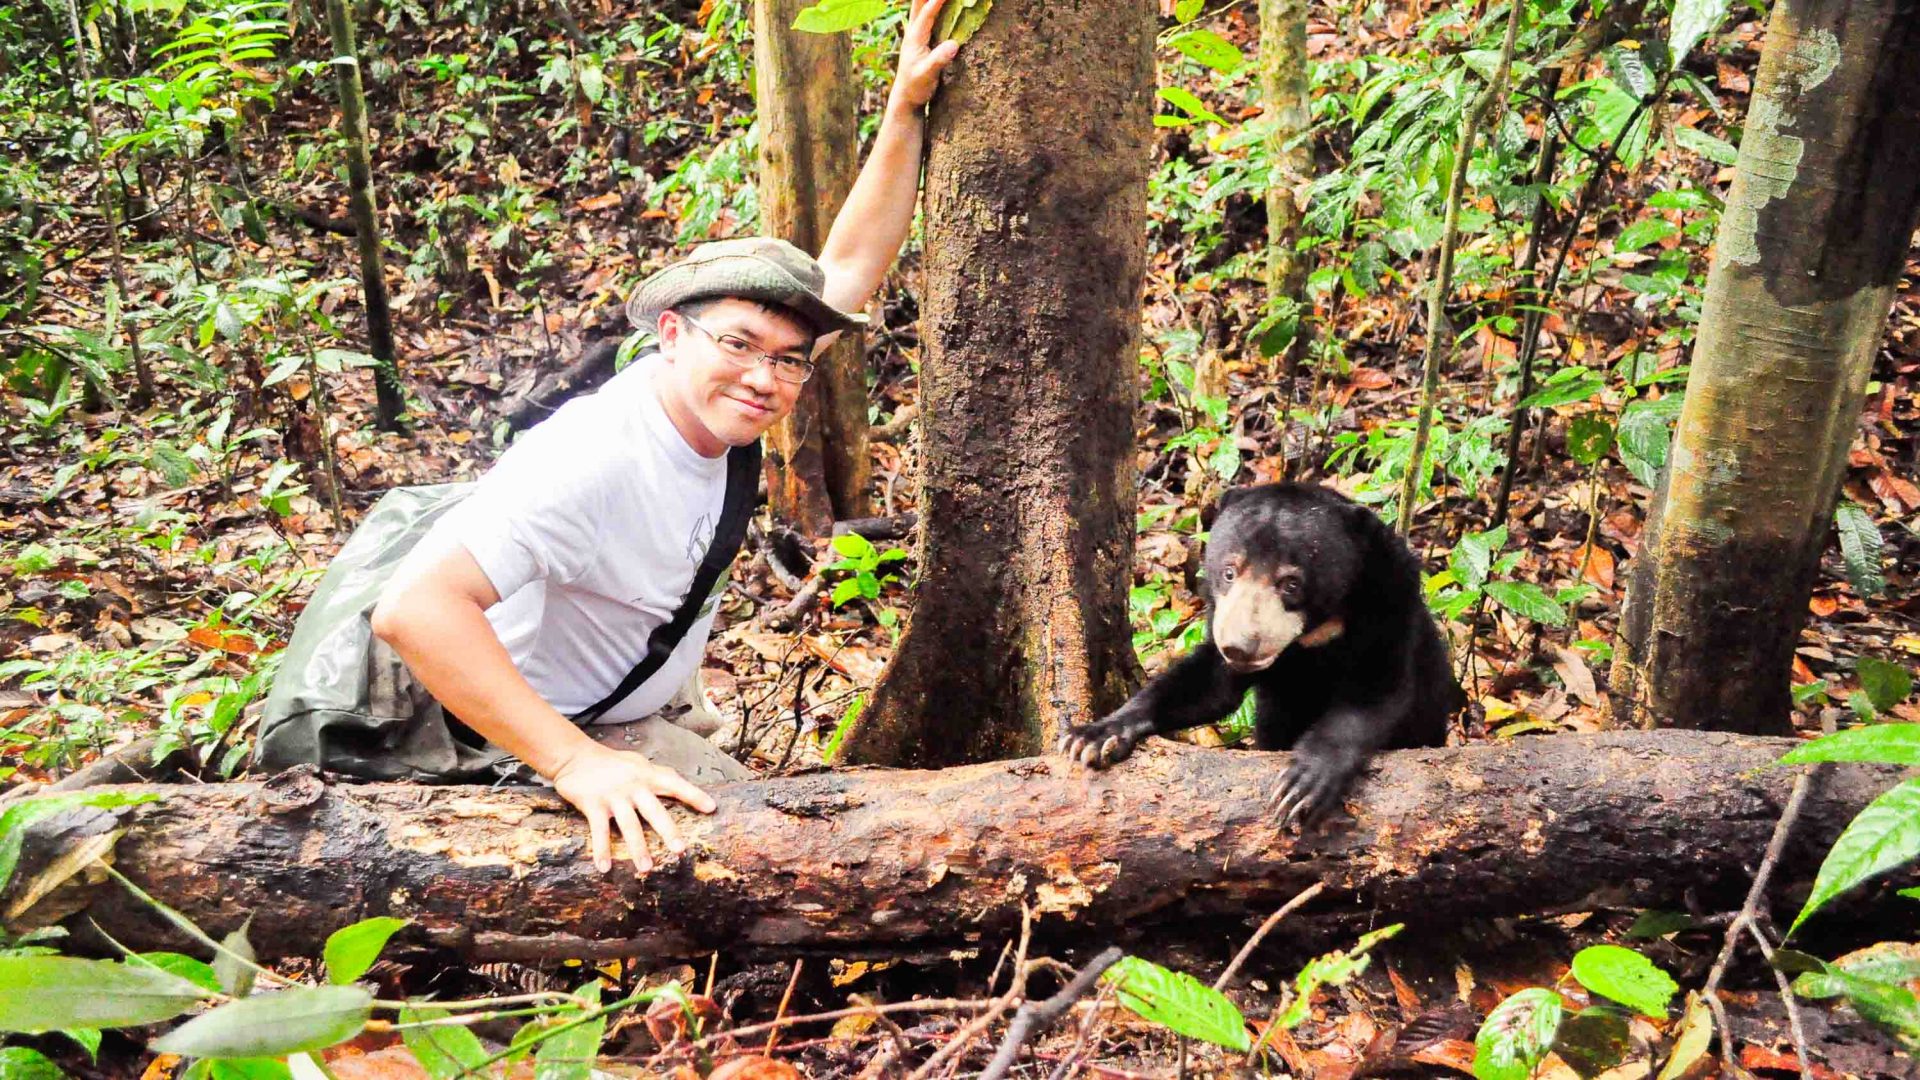 Meet Dr. Wong, the conservationist trying to save the world’s smallest bear